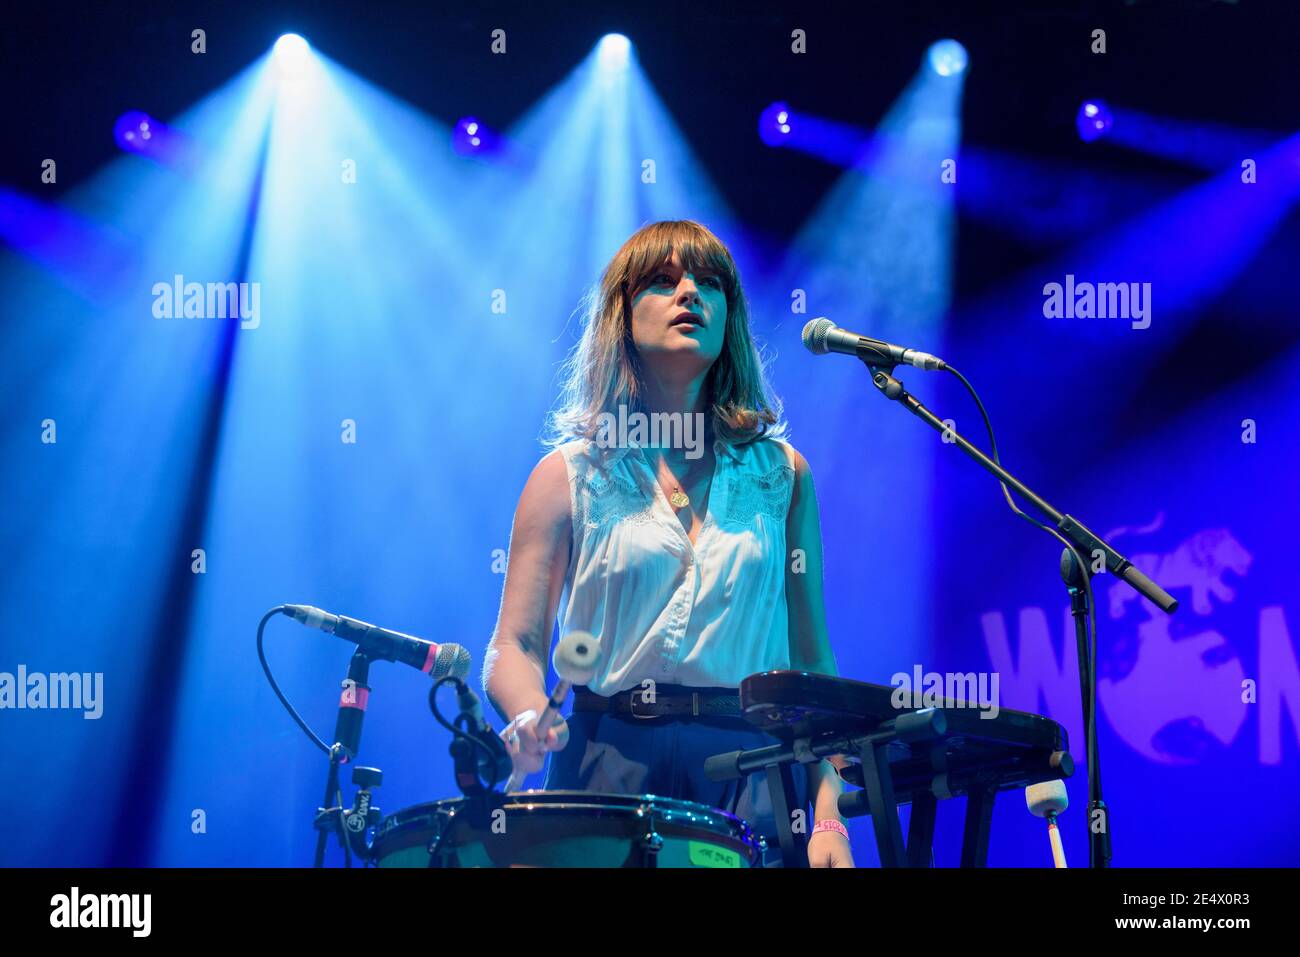 Emily Staveley-Taylor of The Staves performing at the Womad Festival, Charlton Park, UK. July 25, 2015 Stock Photo